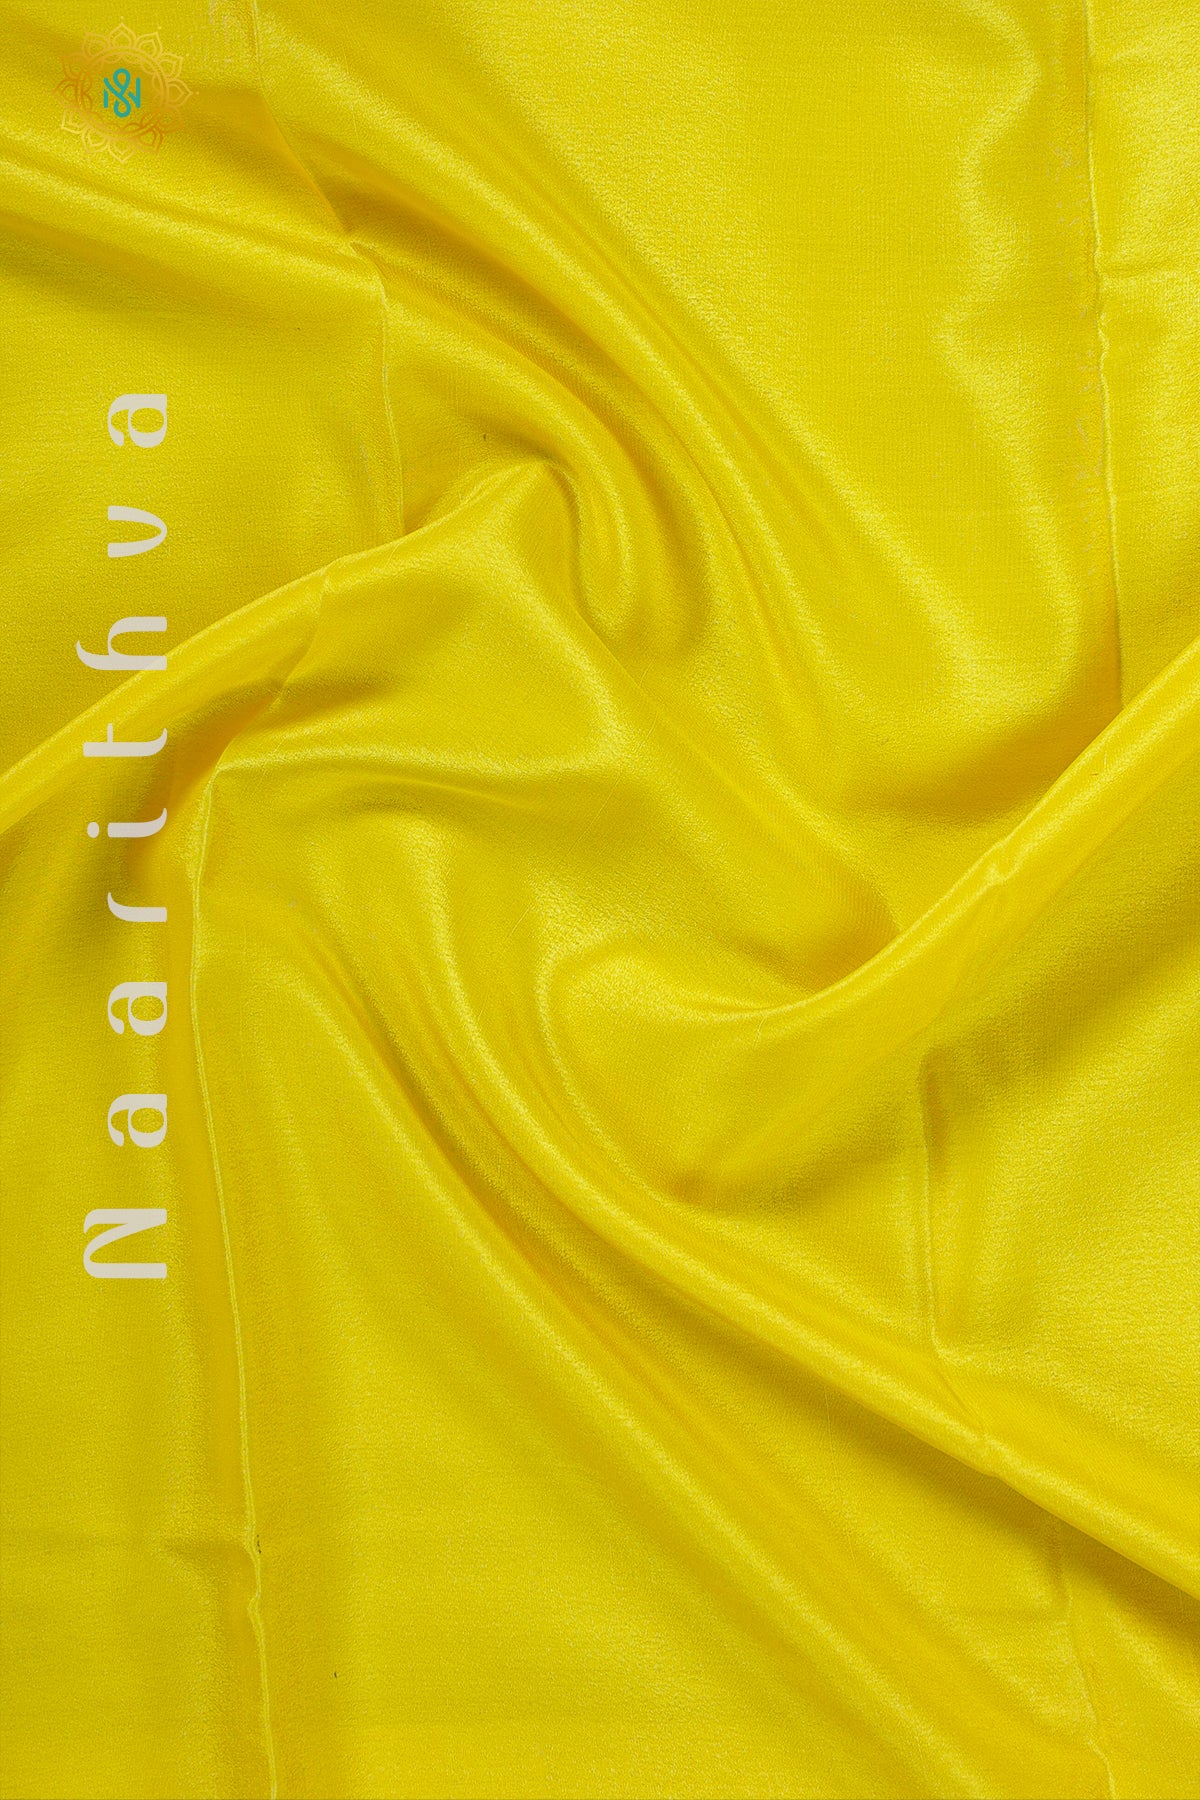 YELLOW WITH WINE AND GREEN - PURE MYSORE CREPE SILK